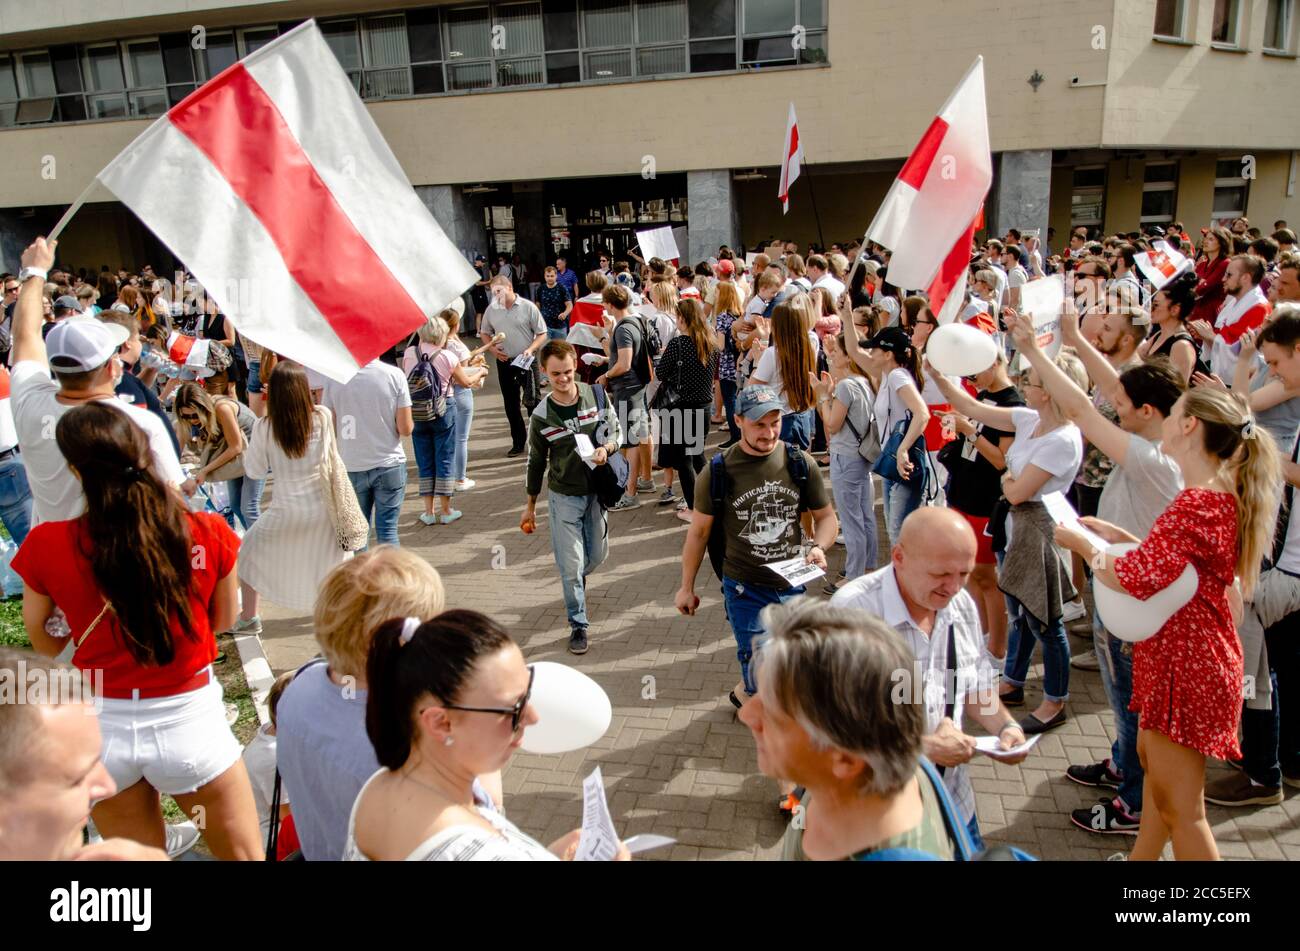 Minsk, Belarus - August 18, 2020: Belarusian protesters support factory workers willing to go on strike. after presidential elections in Belarus Stock Photo